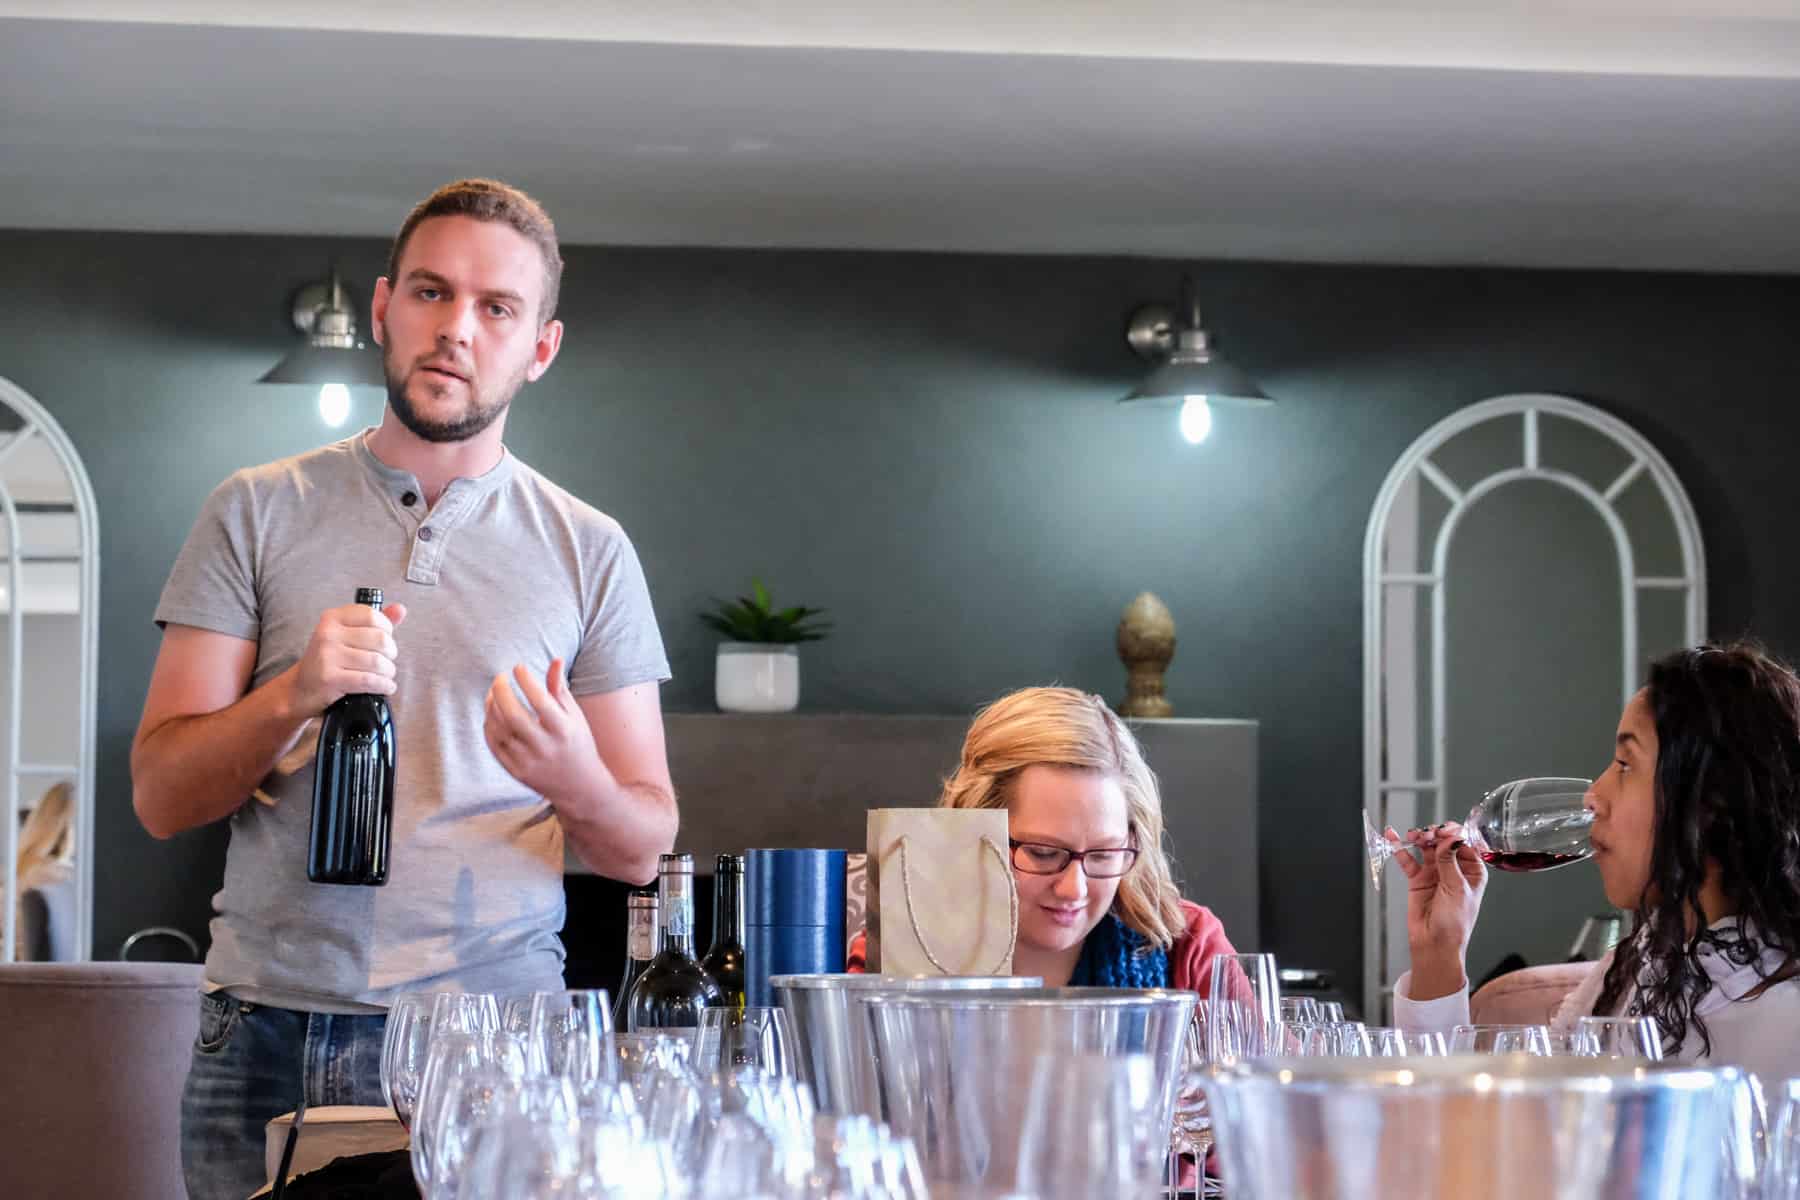 A man in a grey shirt holds a bottle of wine while explaining during a tasting. A woman next to him looks down, while another tries a red wine. The table in front is full of empty wine glasses